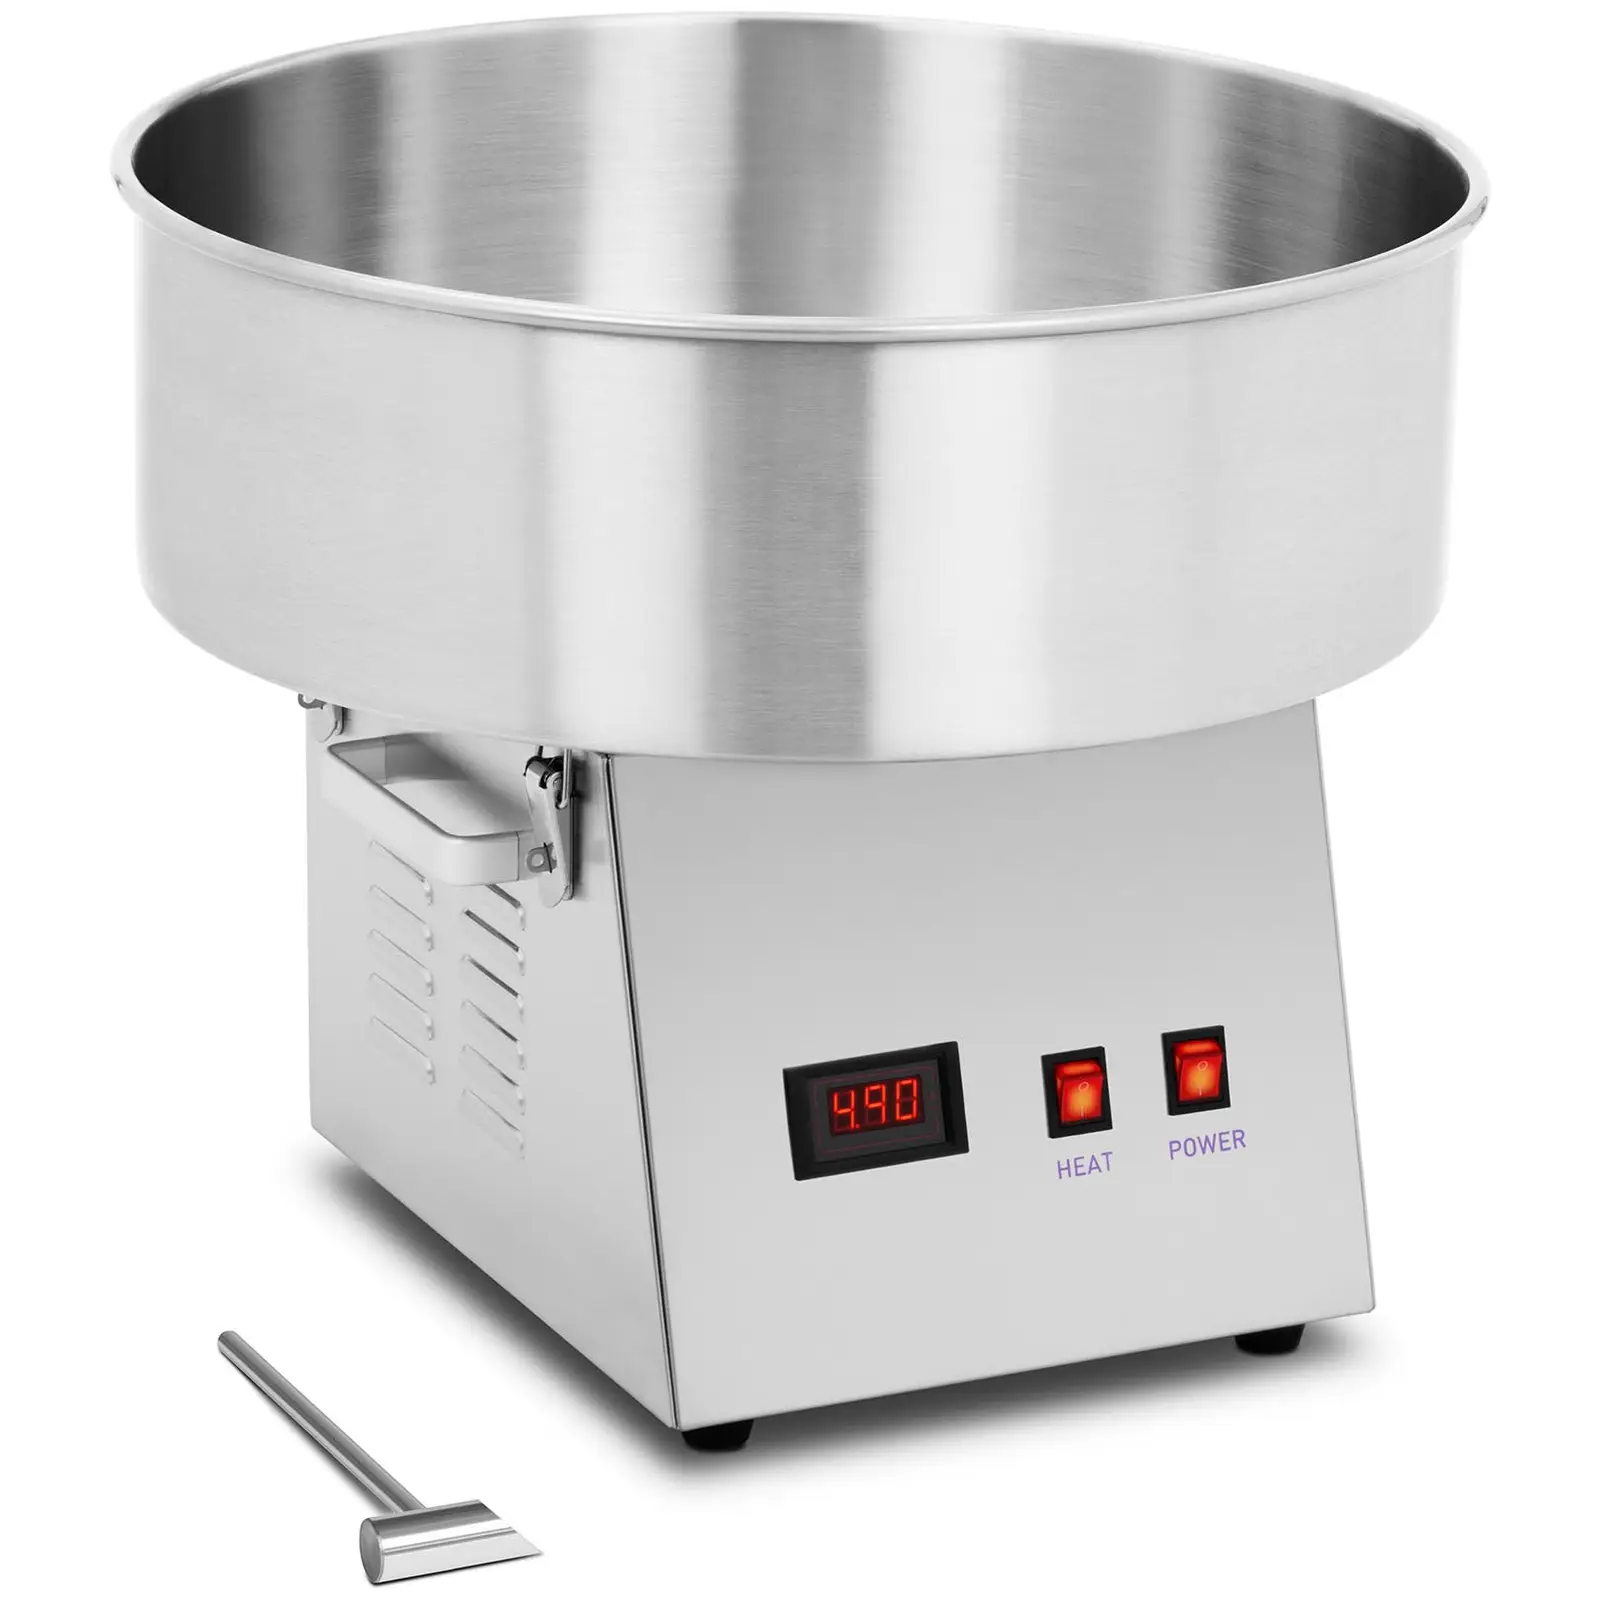 Cotton Candy Machine - 52 cm - 1,080 W - stainless steel